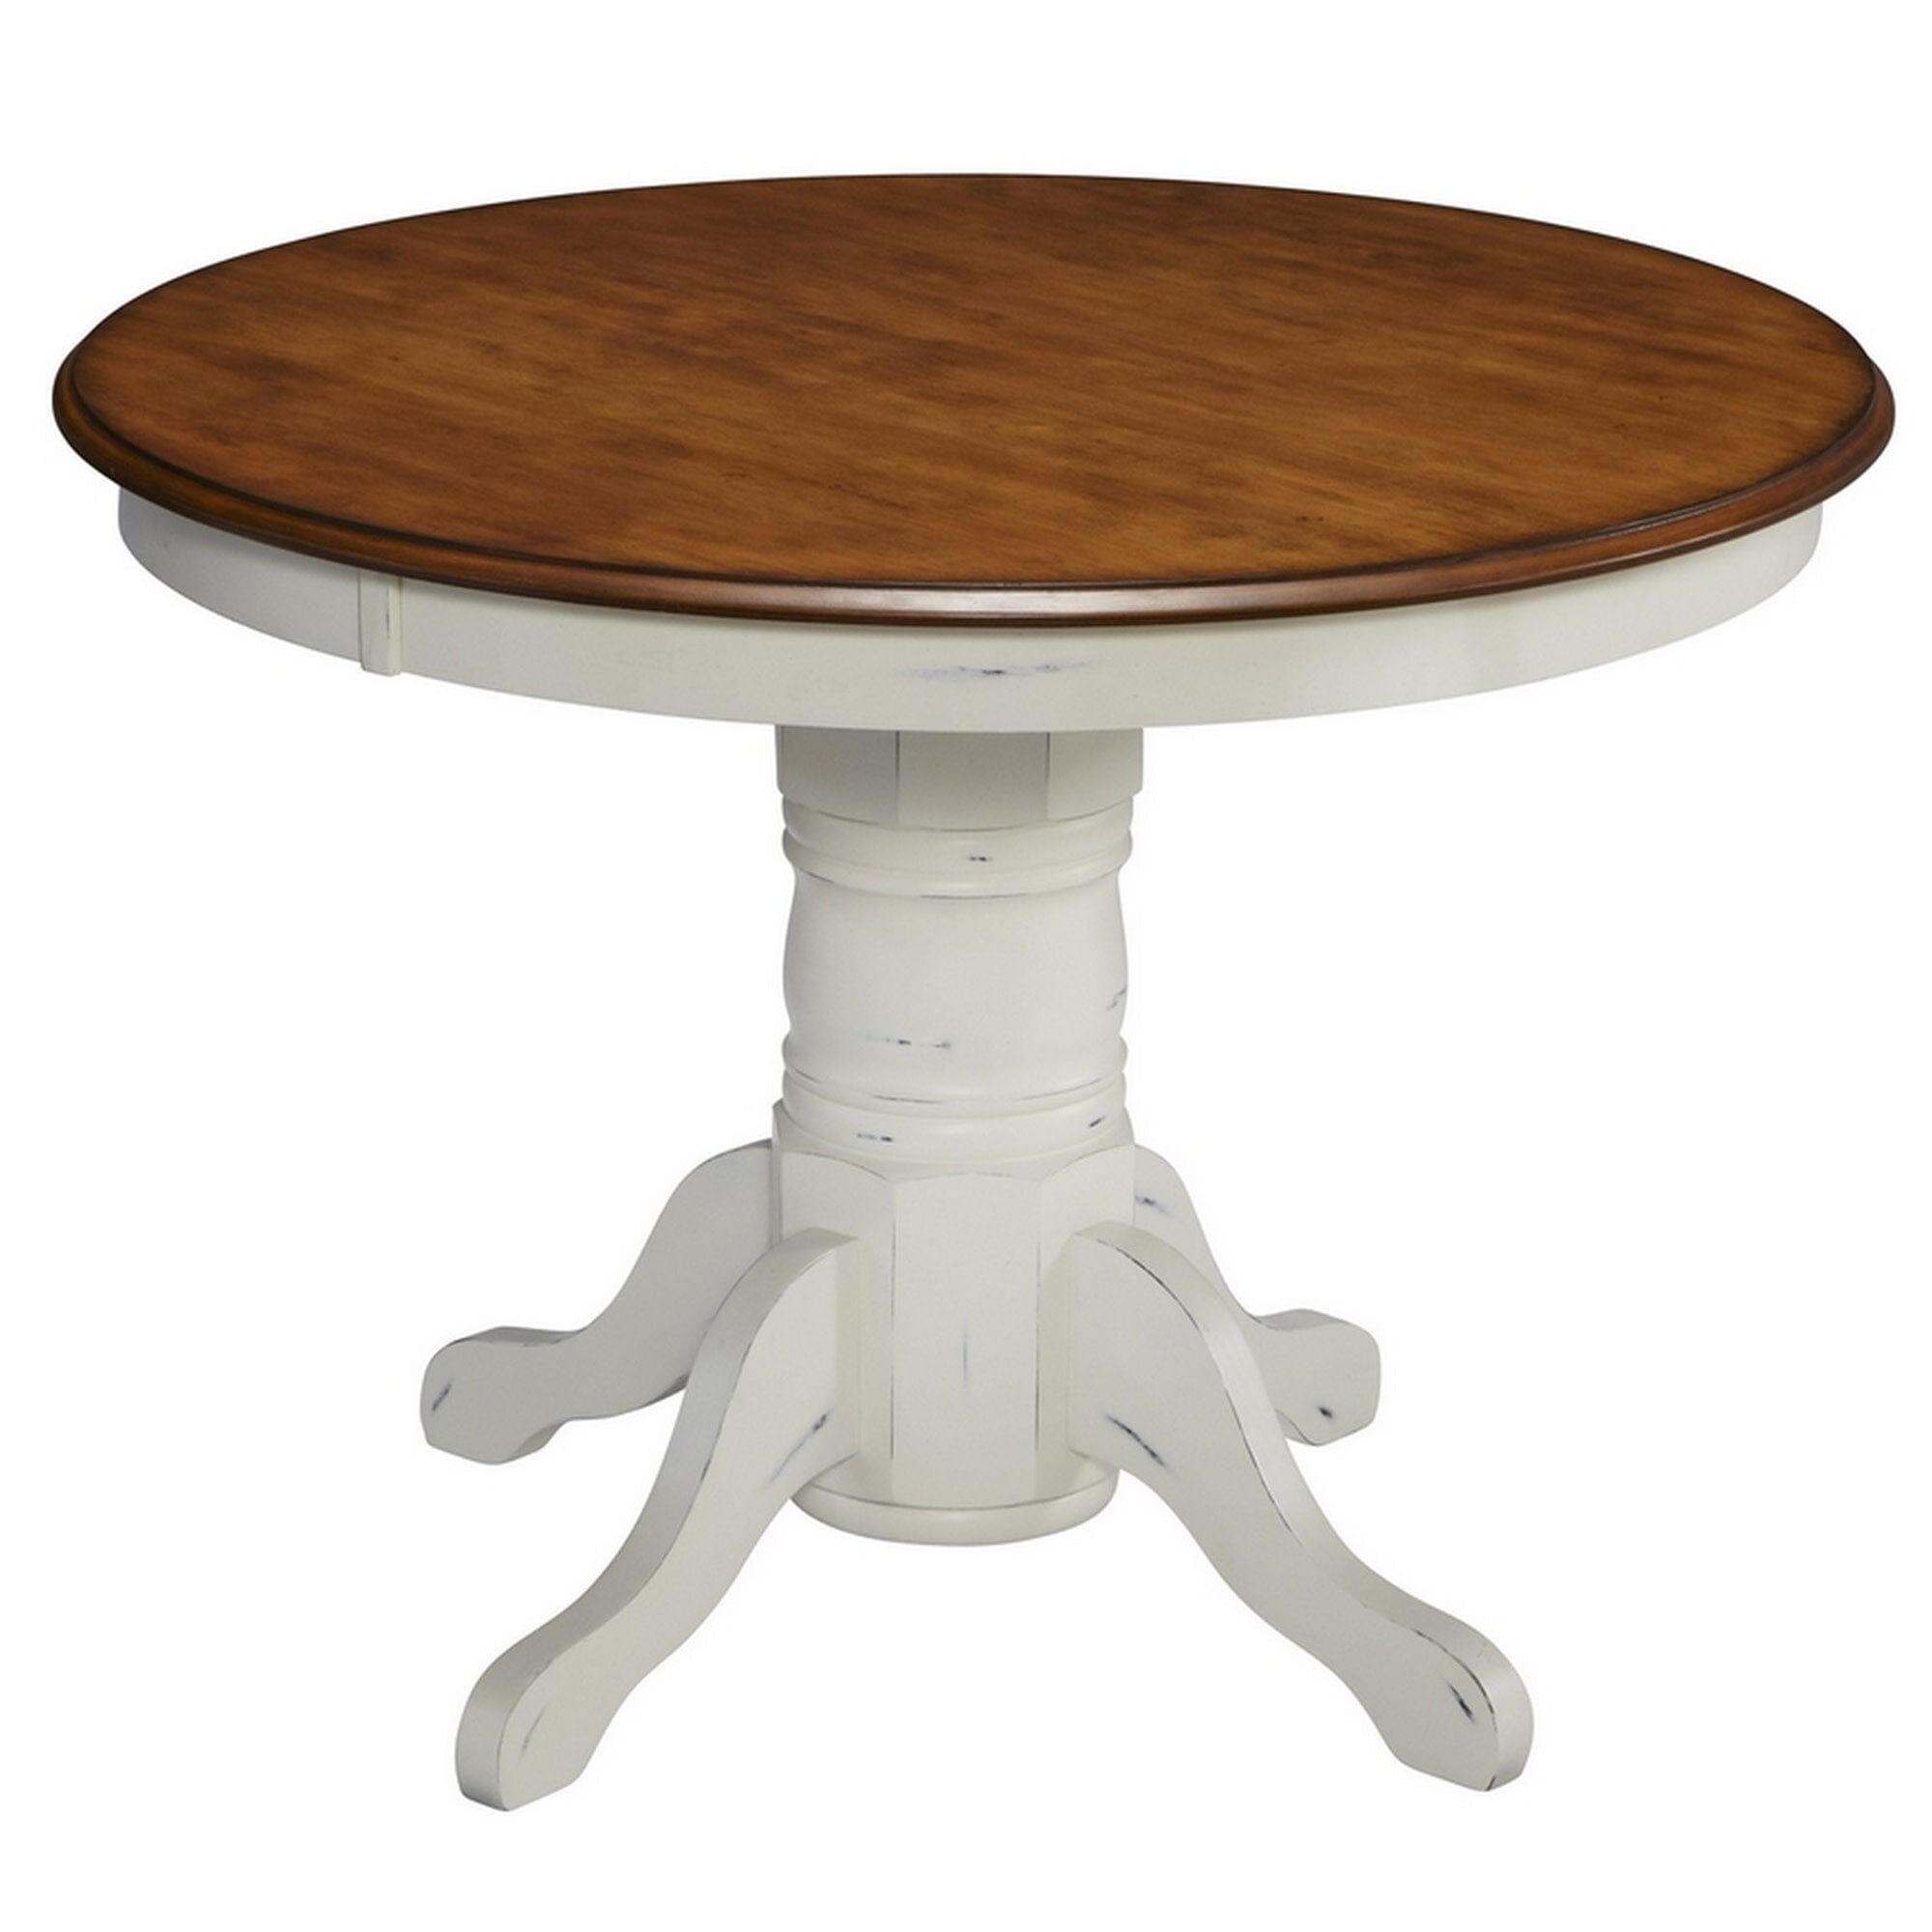 Traditional Pedestal Dining Table By French Countryside Dining Table French Countryside